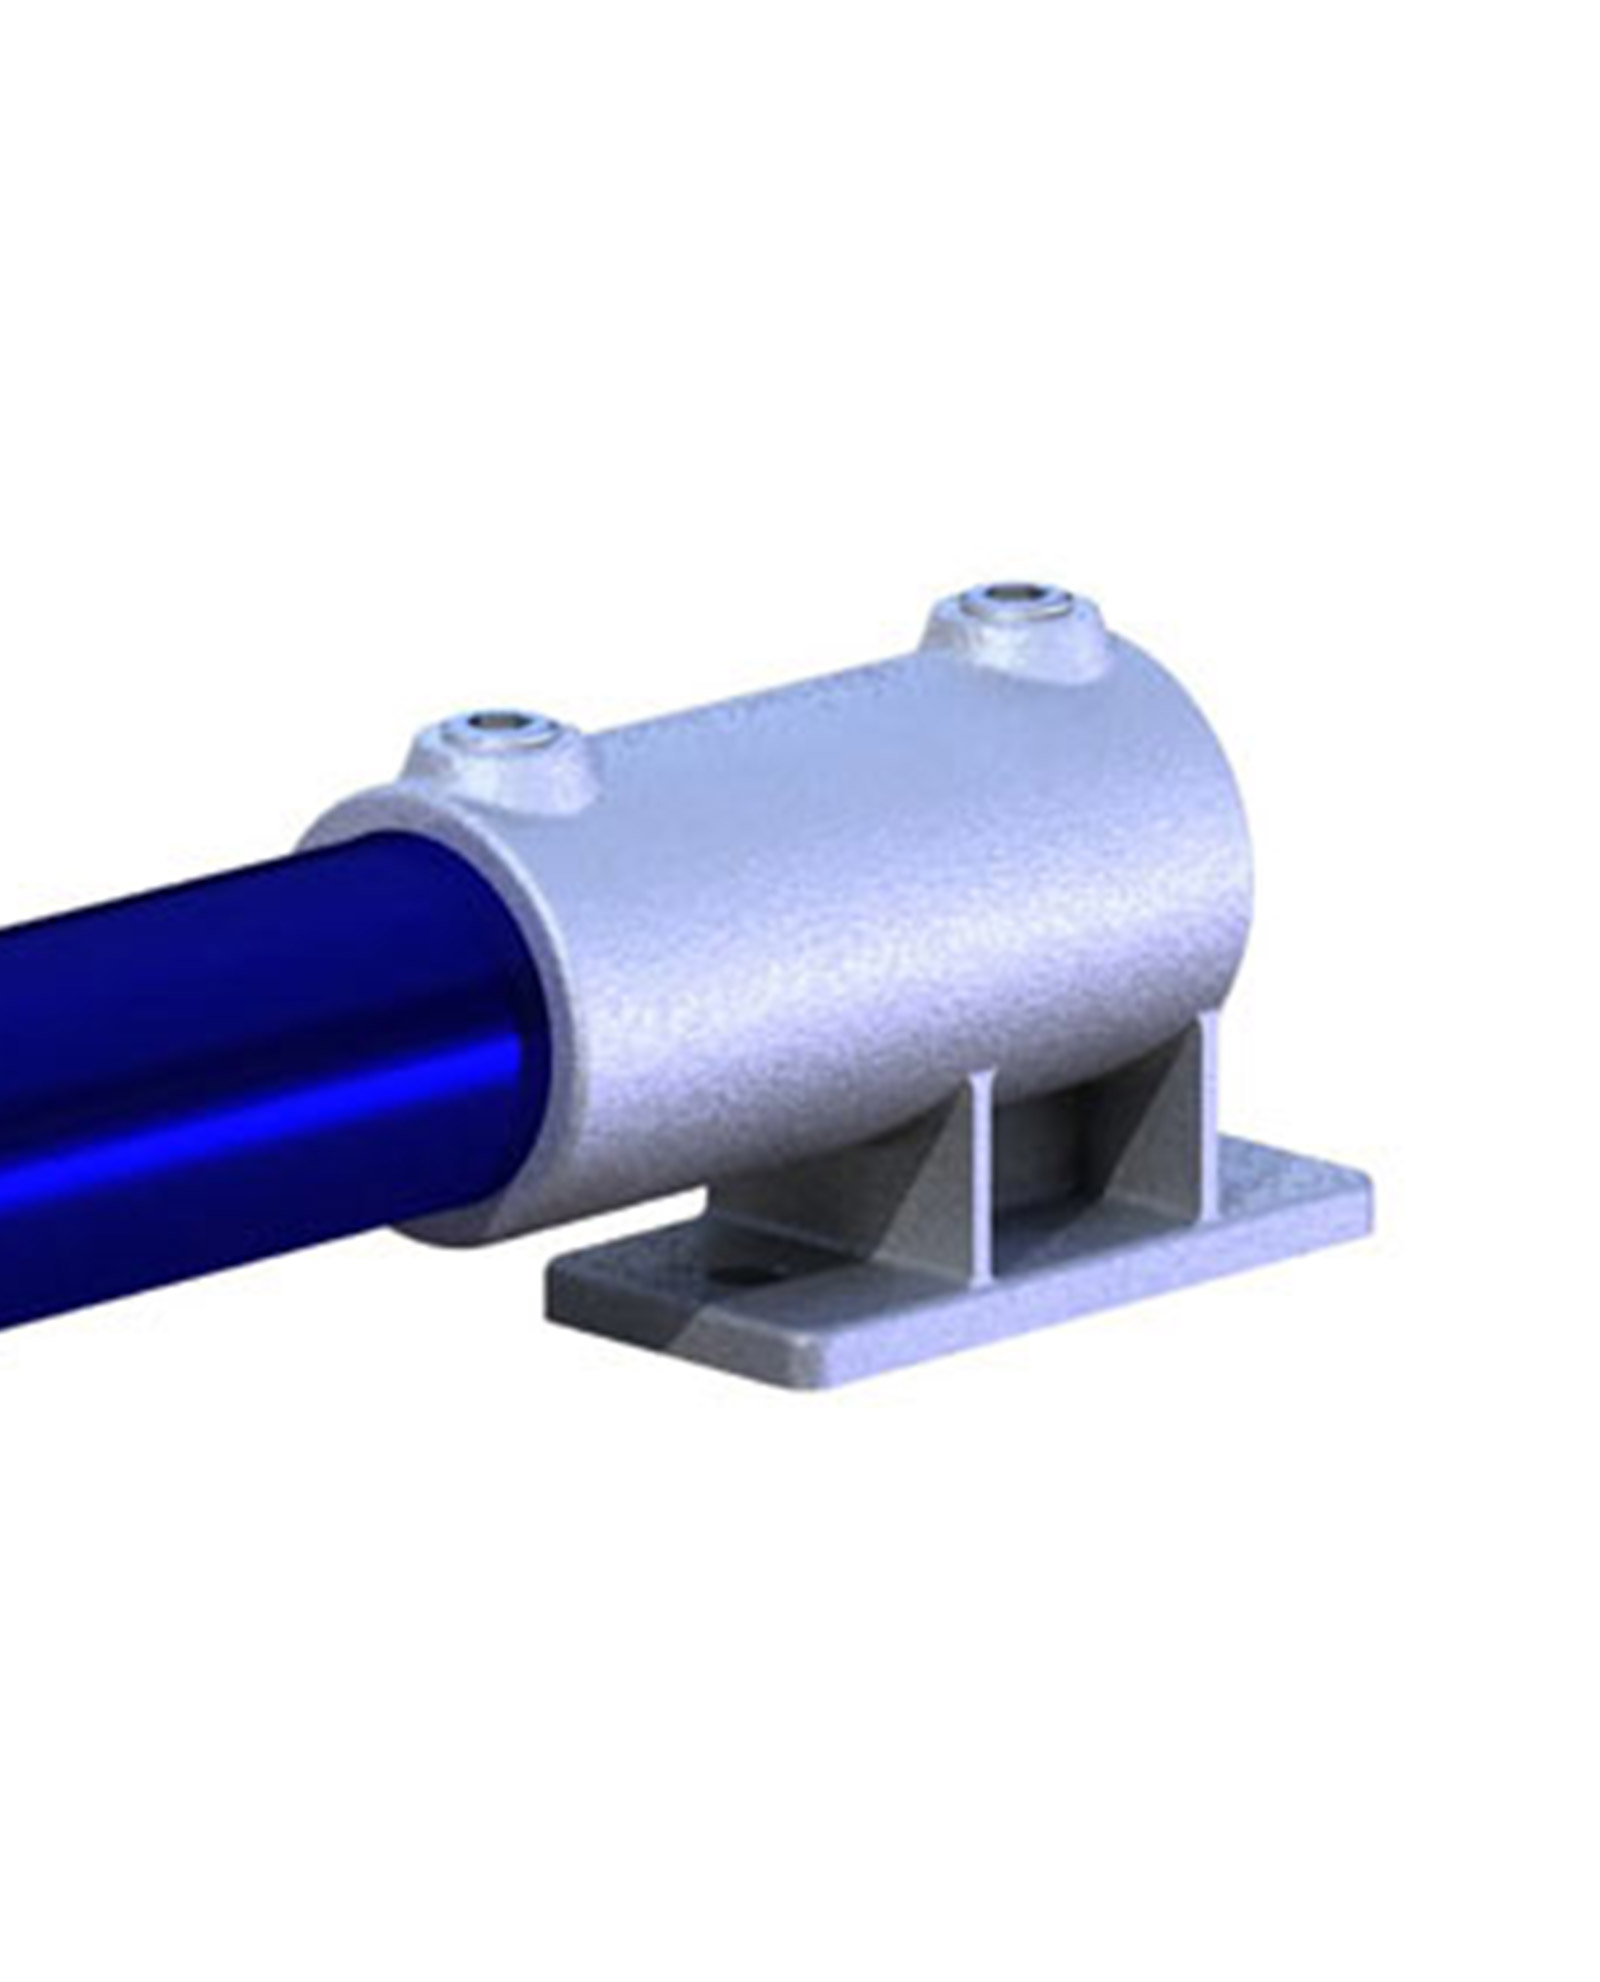 Doughty pipeclamp Railing Side Support Vertical Base